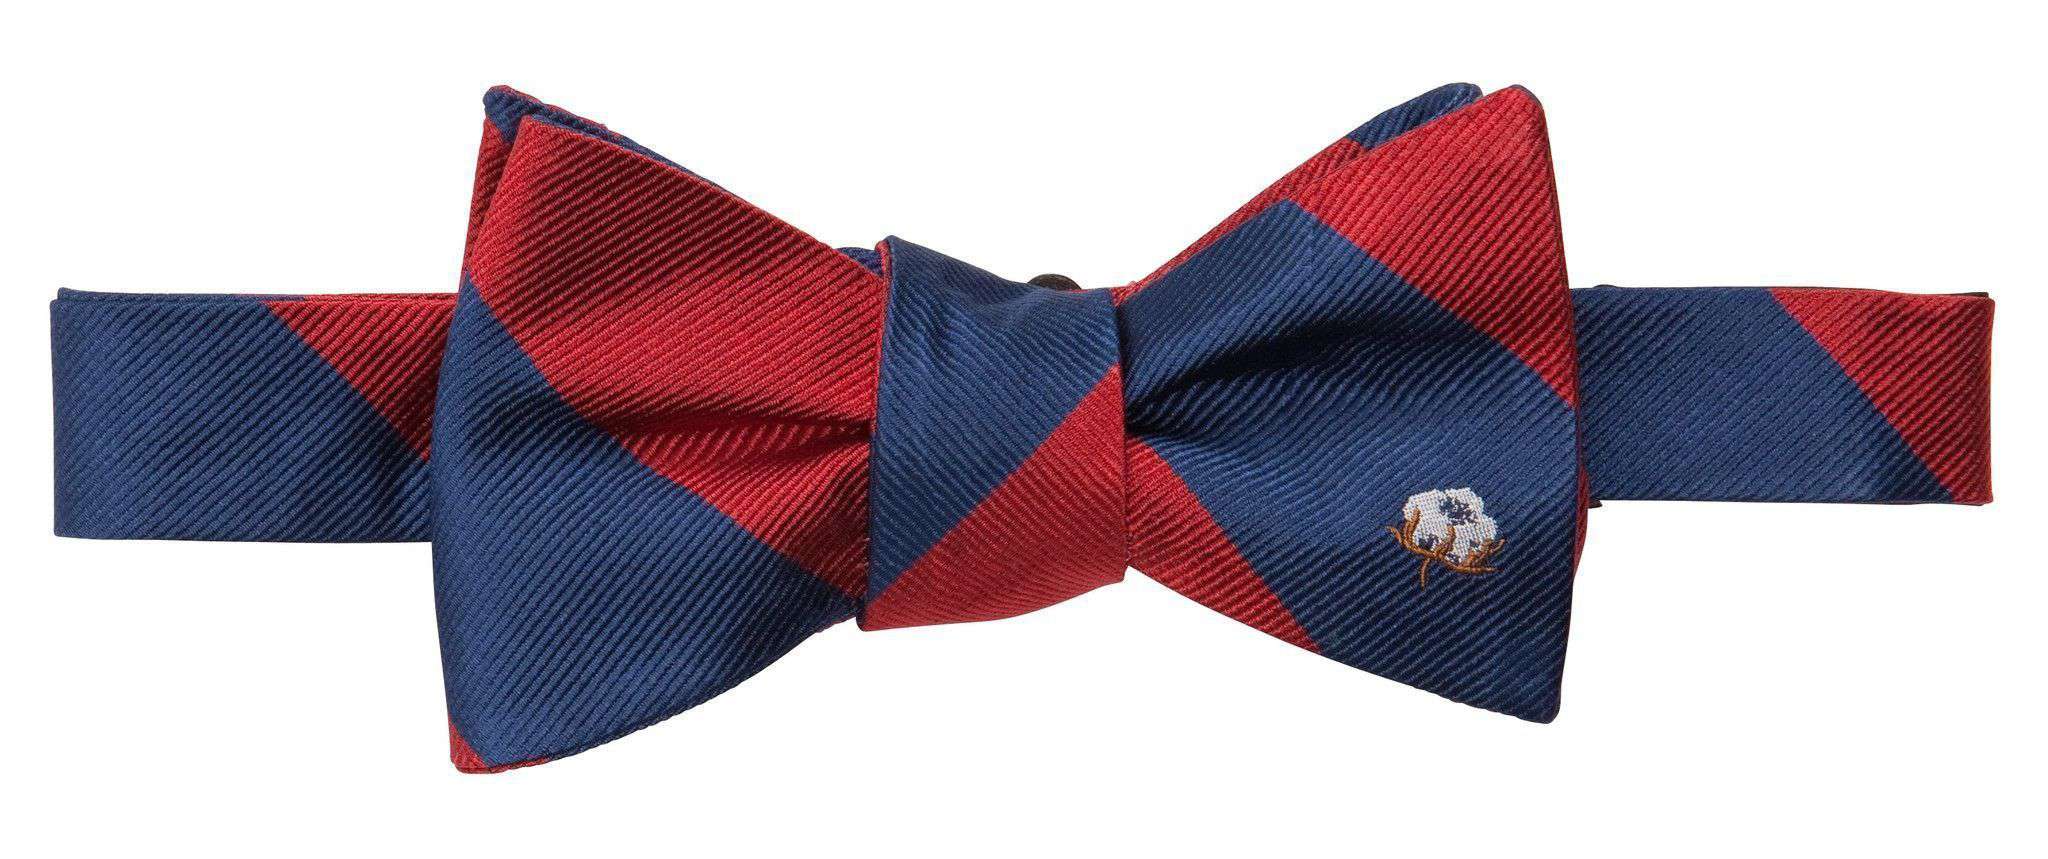 Cotton Boll Bow Tie in Red/Navy by Southern Proper - Country Club Prep